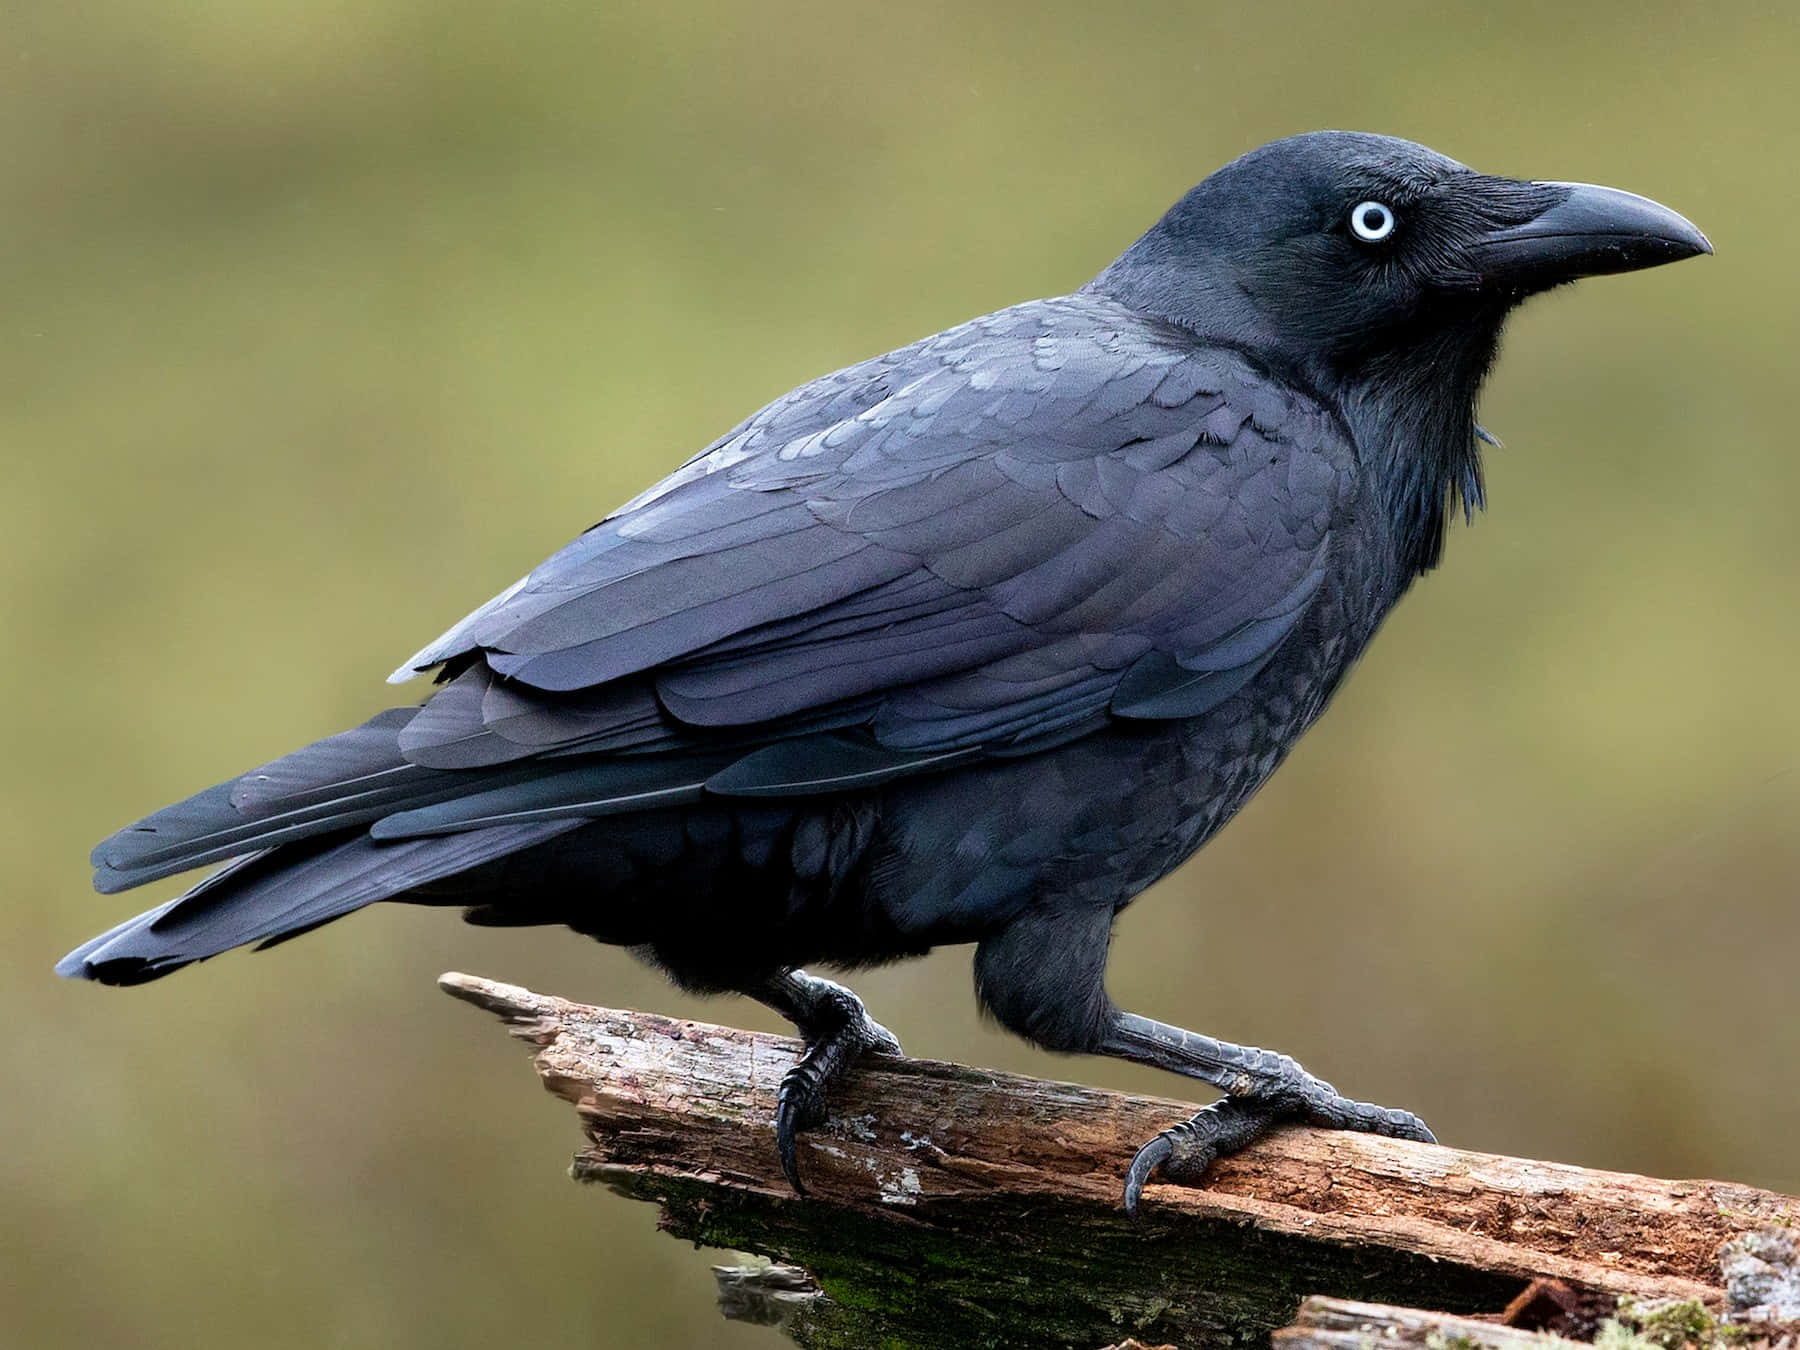 A dark and mysterious Raven perched atop a wooden post